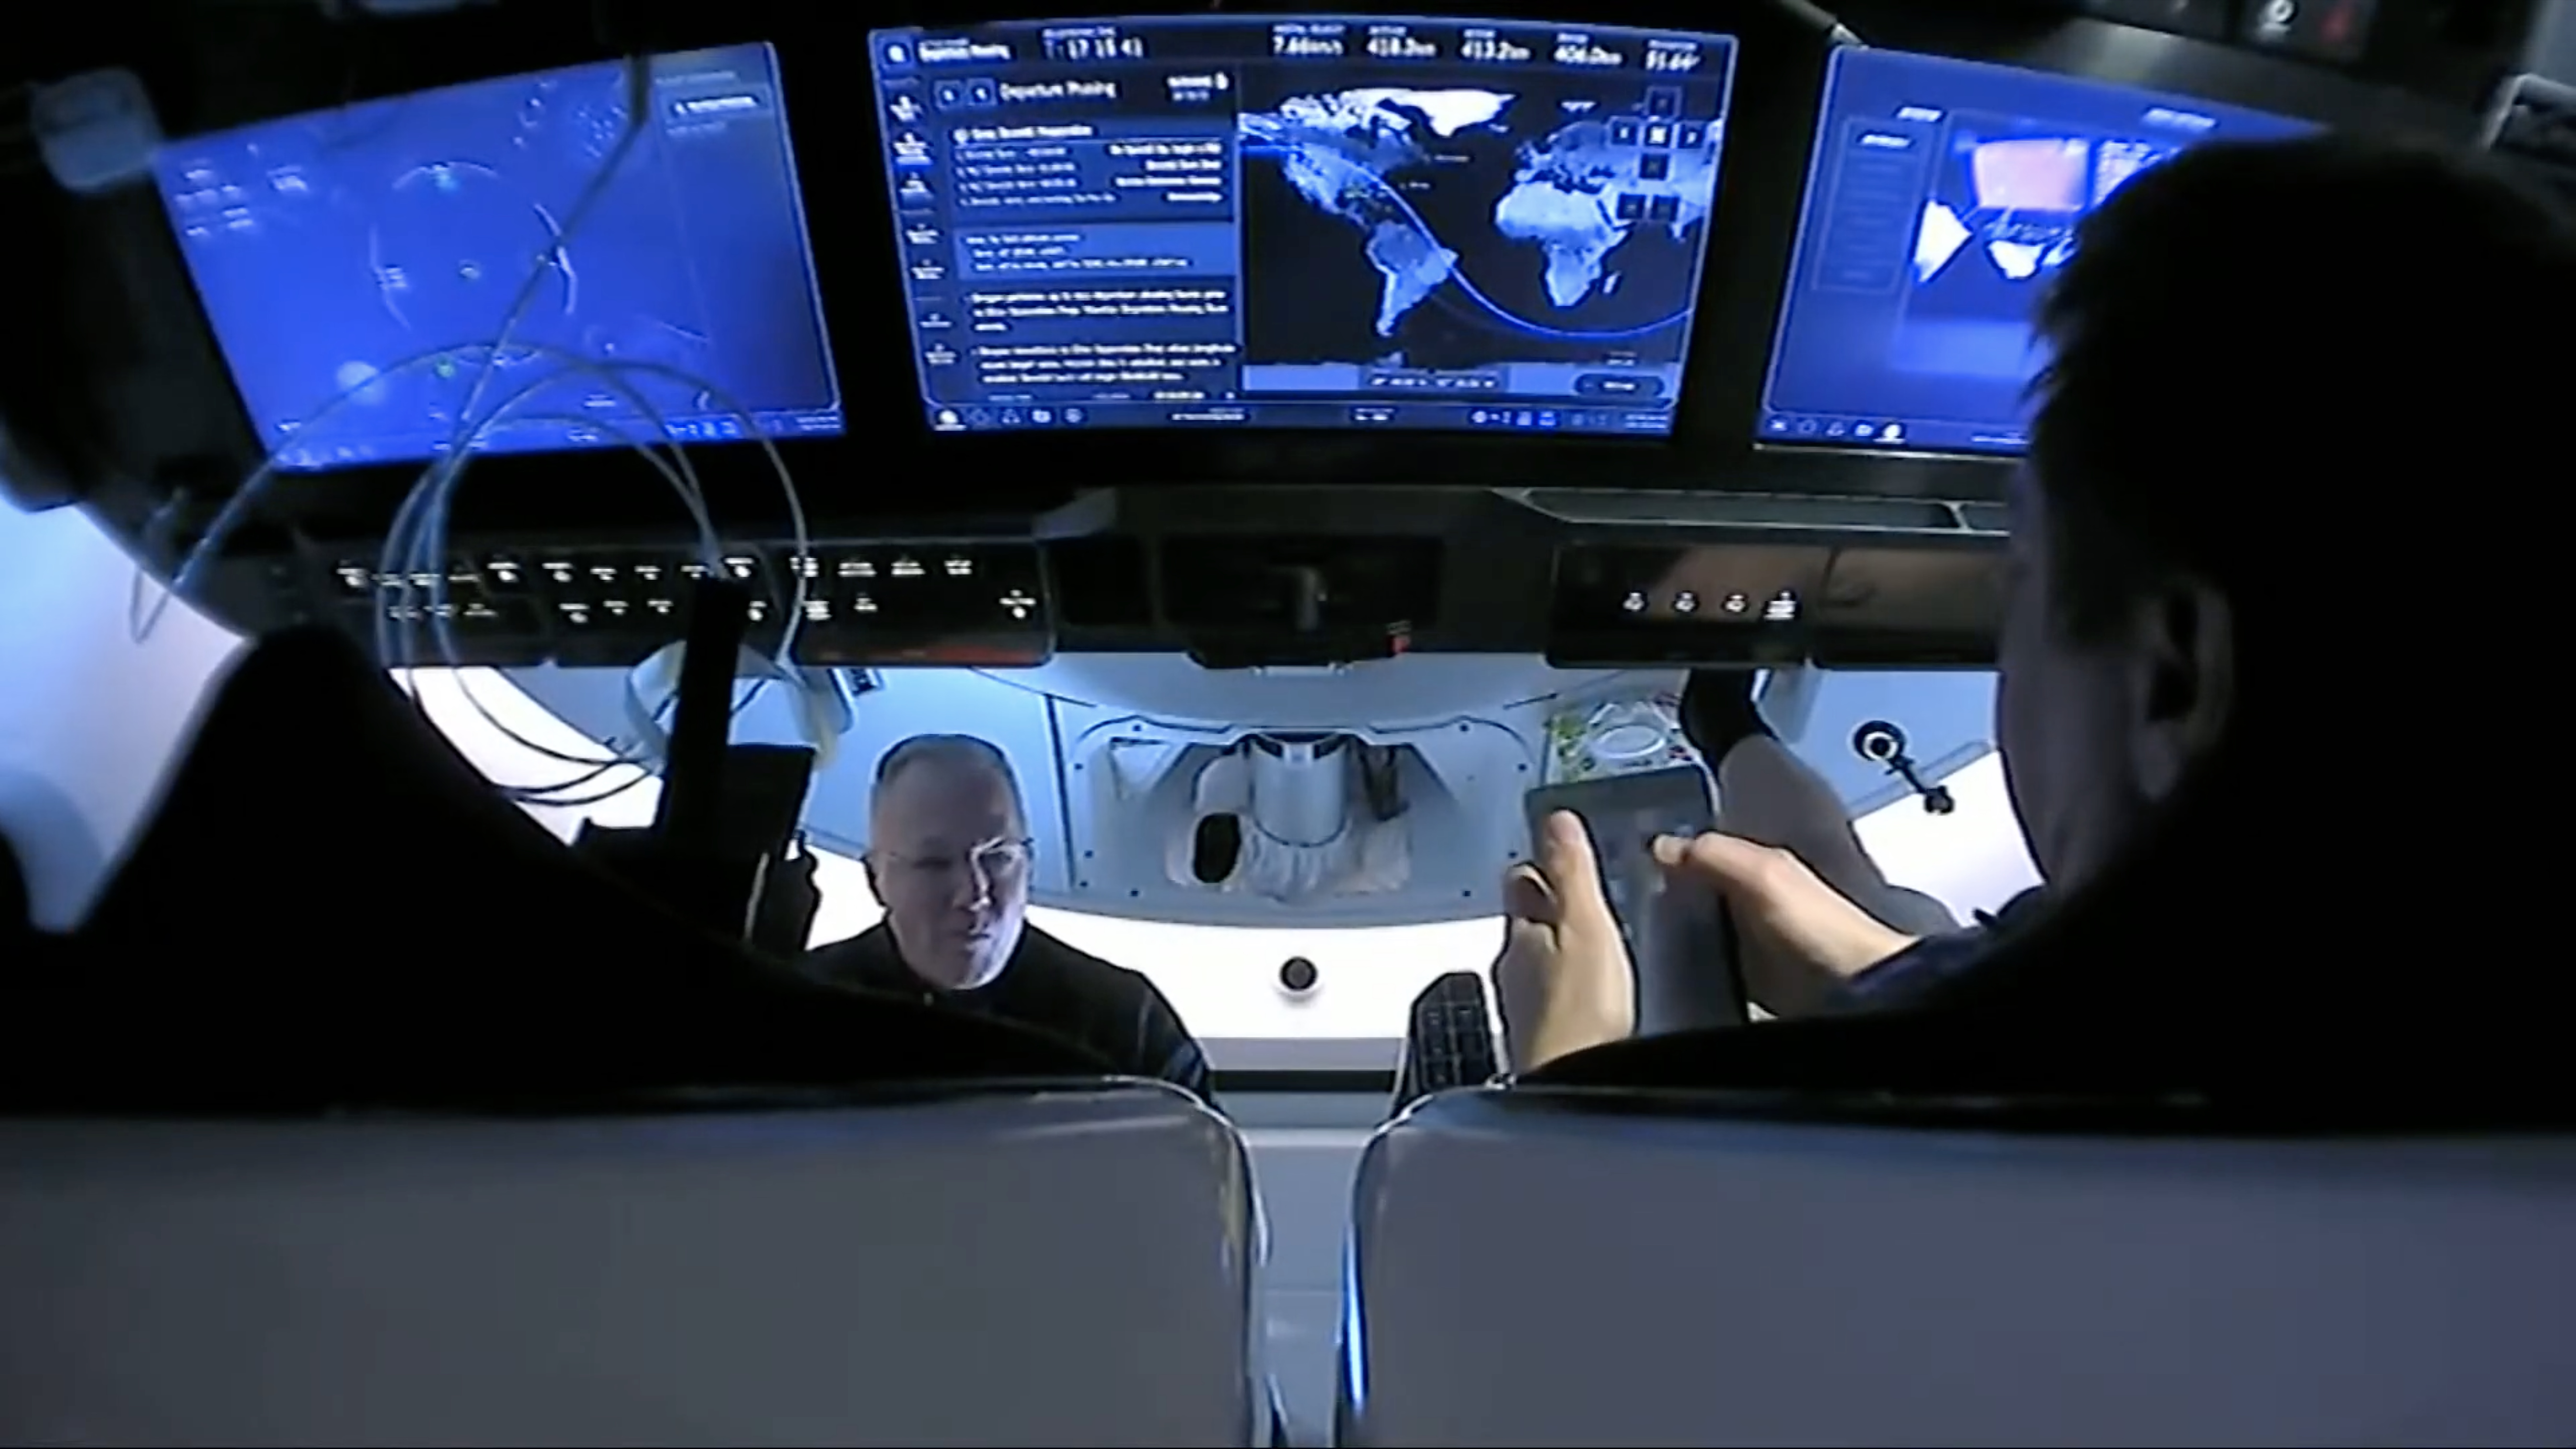 Does SpaceX use ipads?